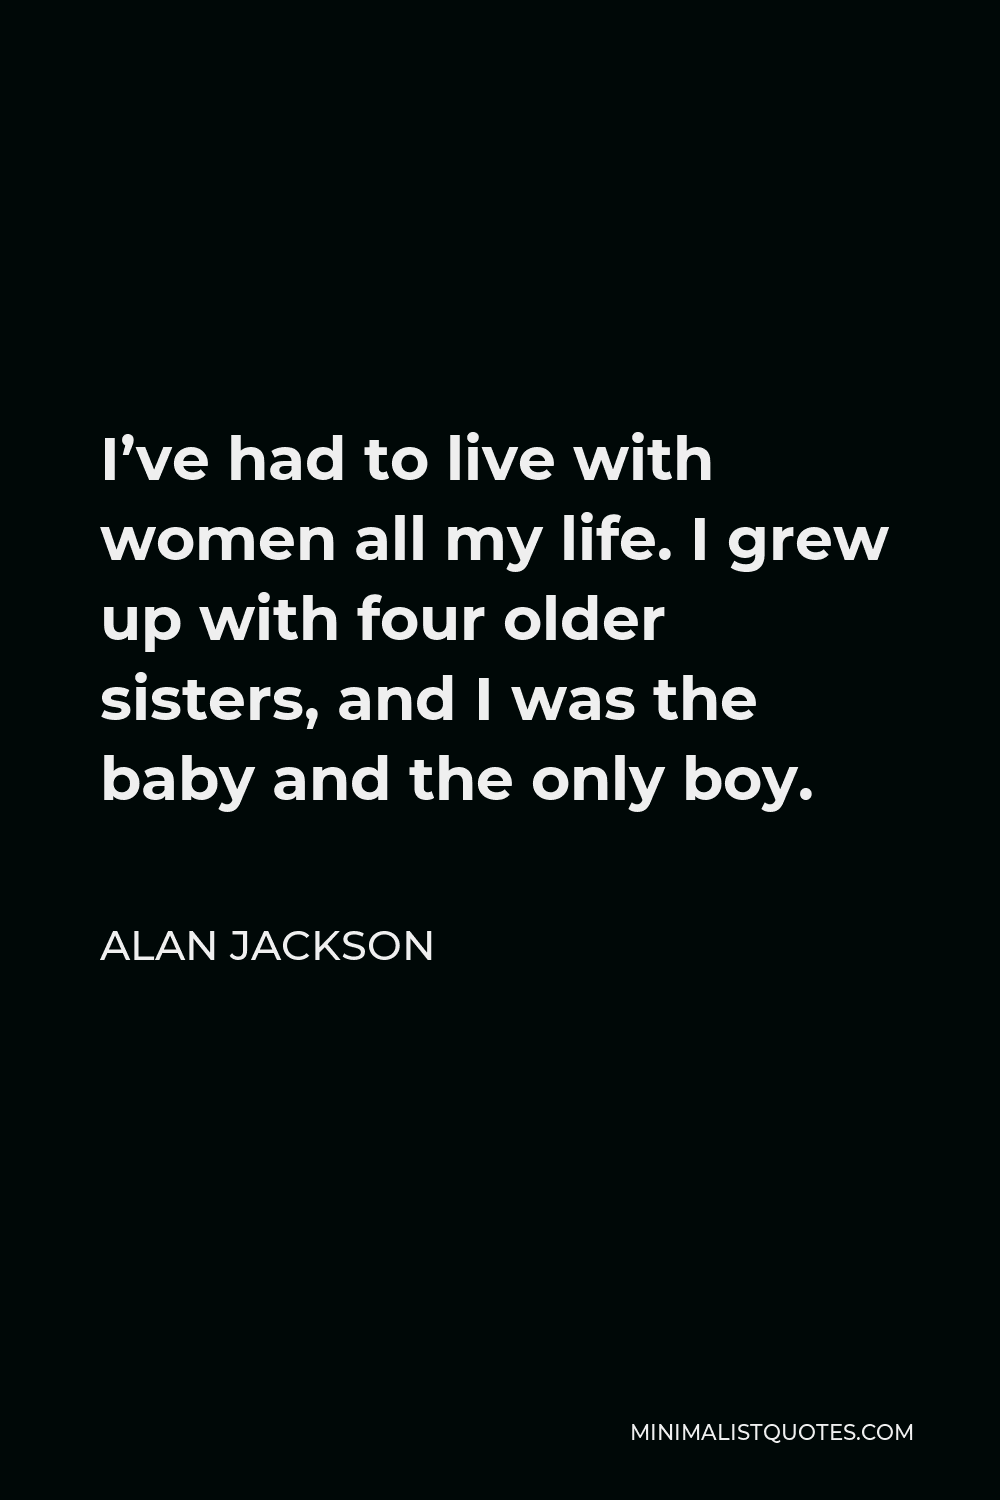 Alan Jackson Quote - I’ve had to live with women all my life. I grew up with four older sisters, and I was the baby and the only boy.